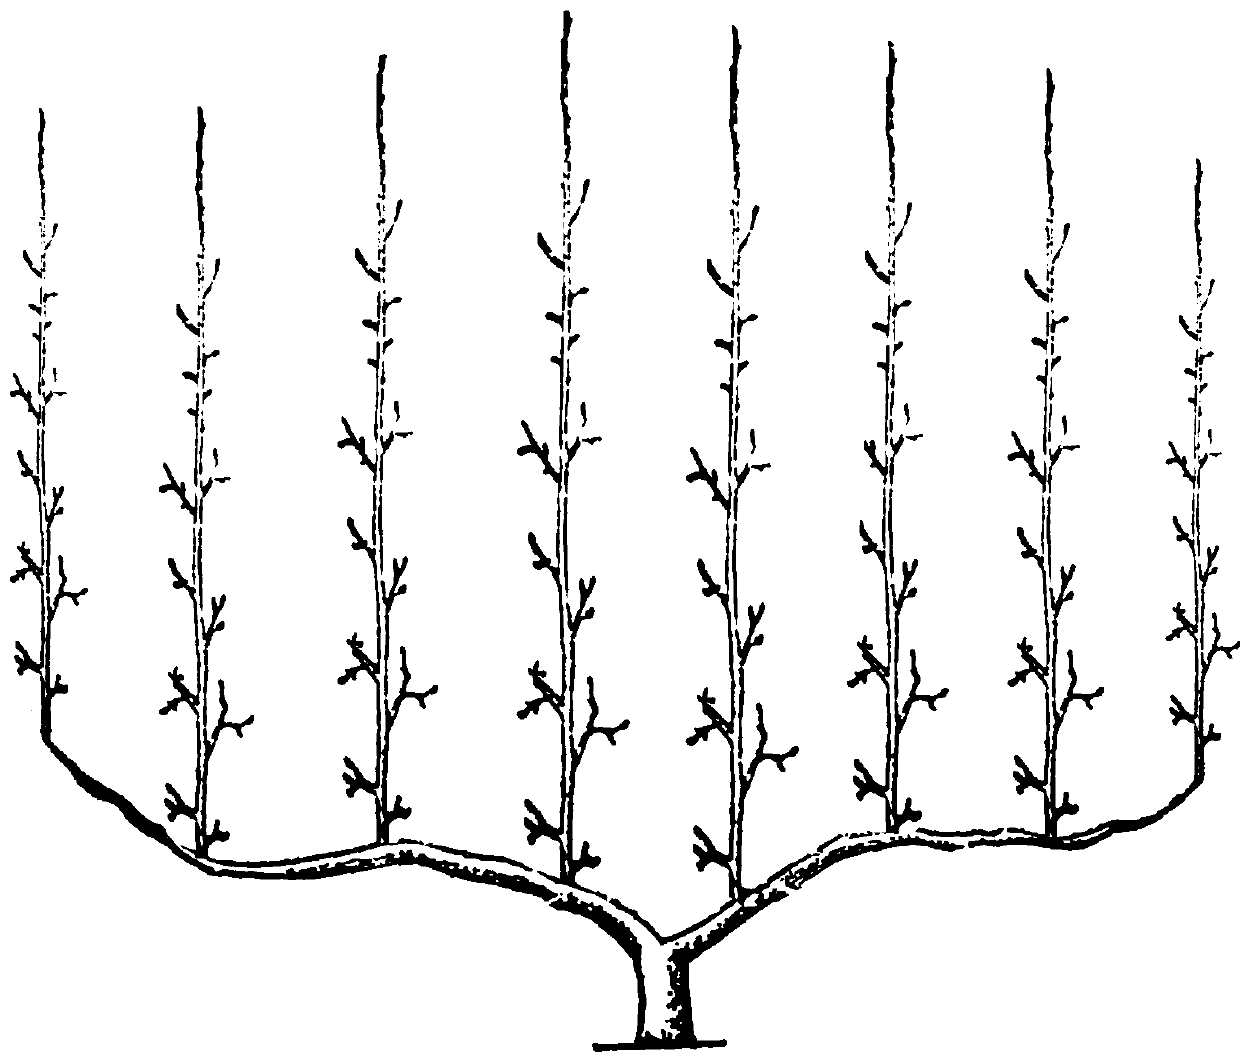 A pear tree "comb-shaped hedge" tree shape and its shaping method